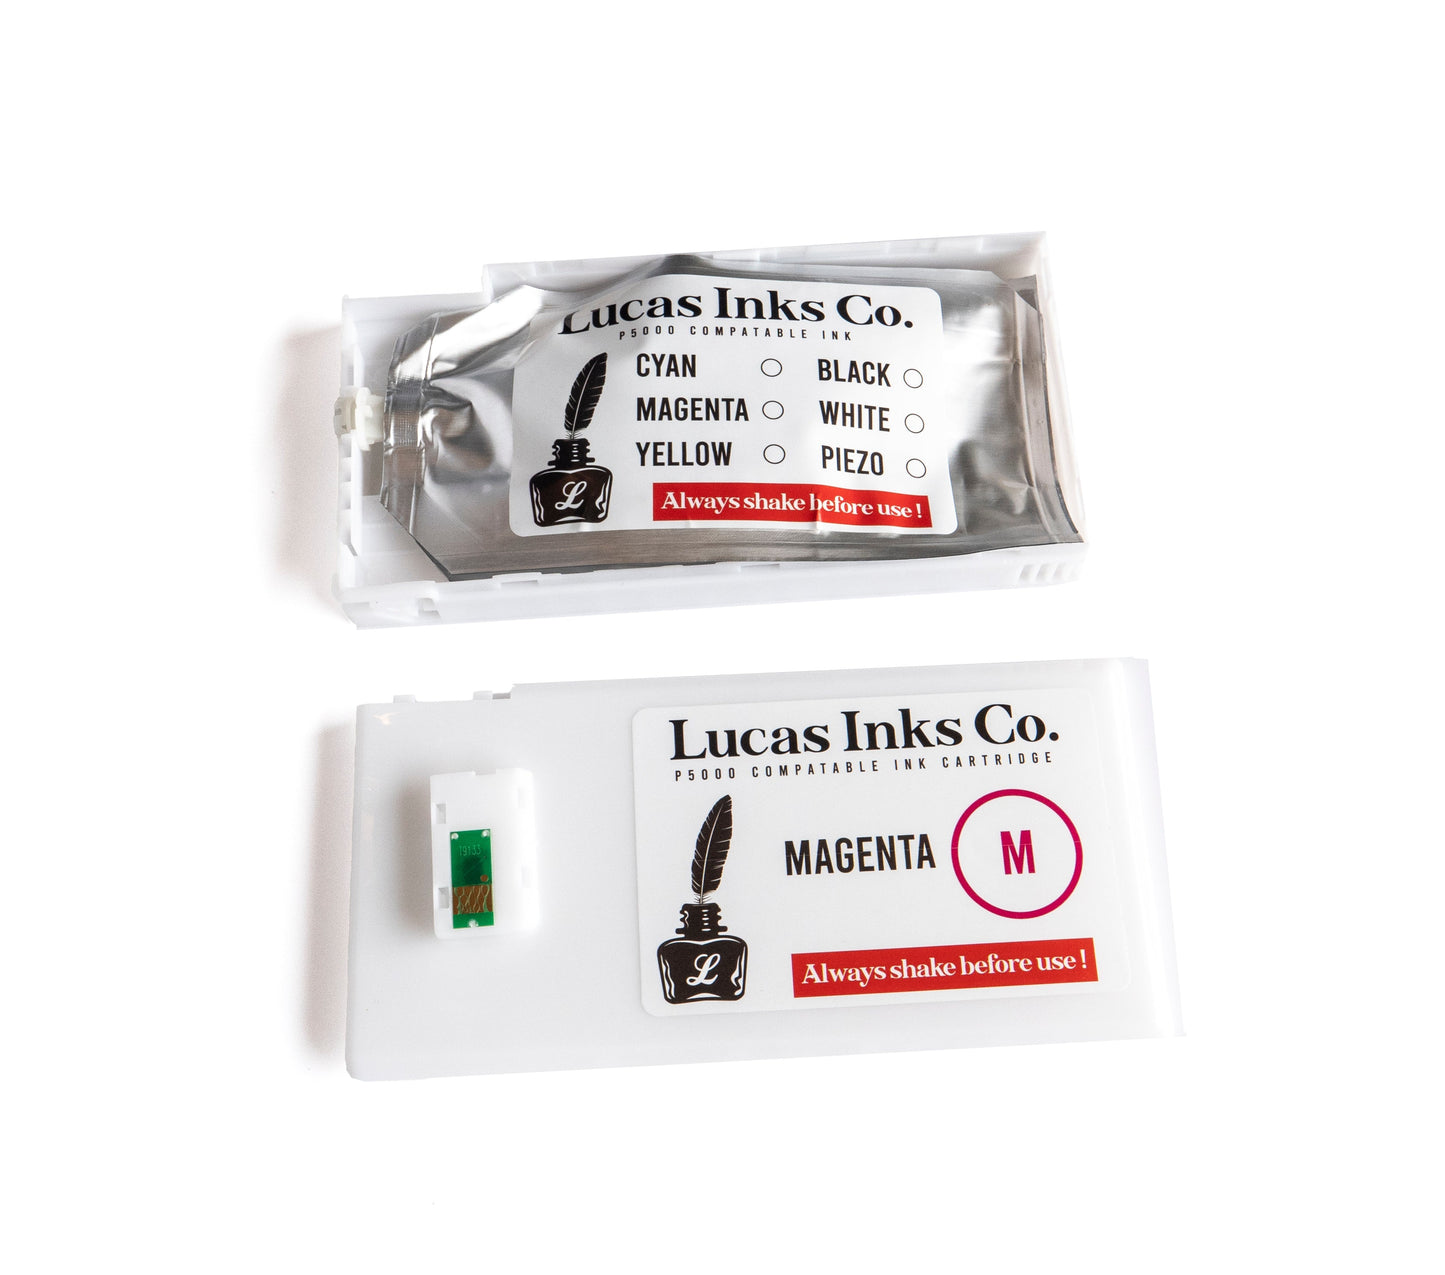 Lucas Inks - Epson 4900 - 220ml Ink Pouch Cartridge System